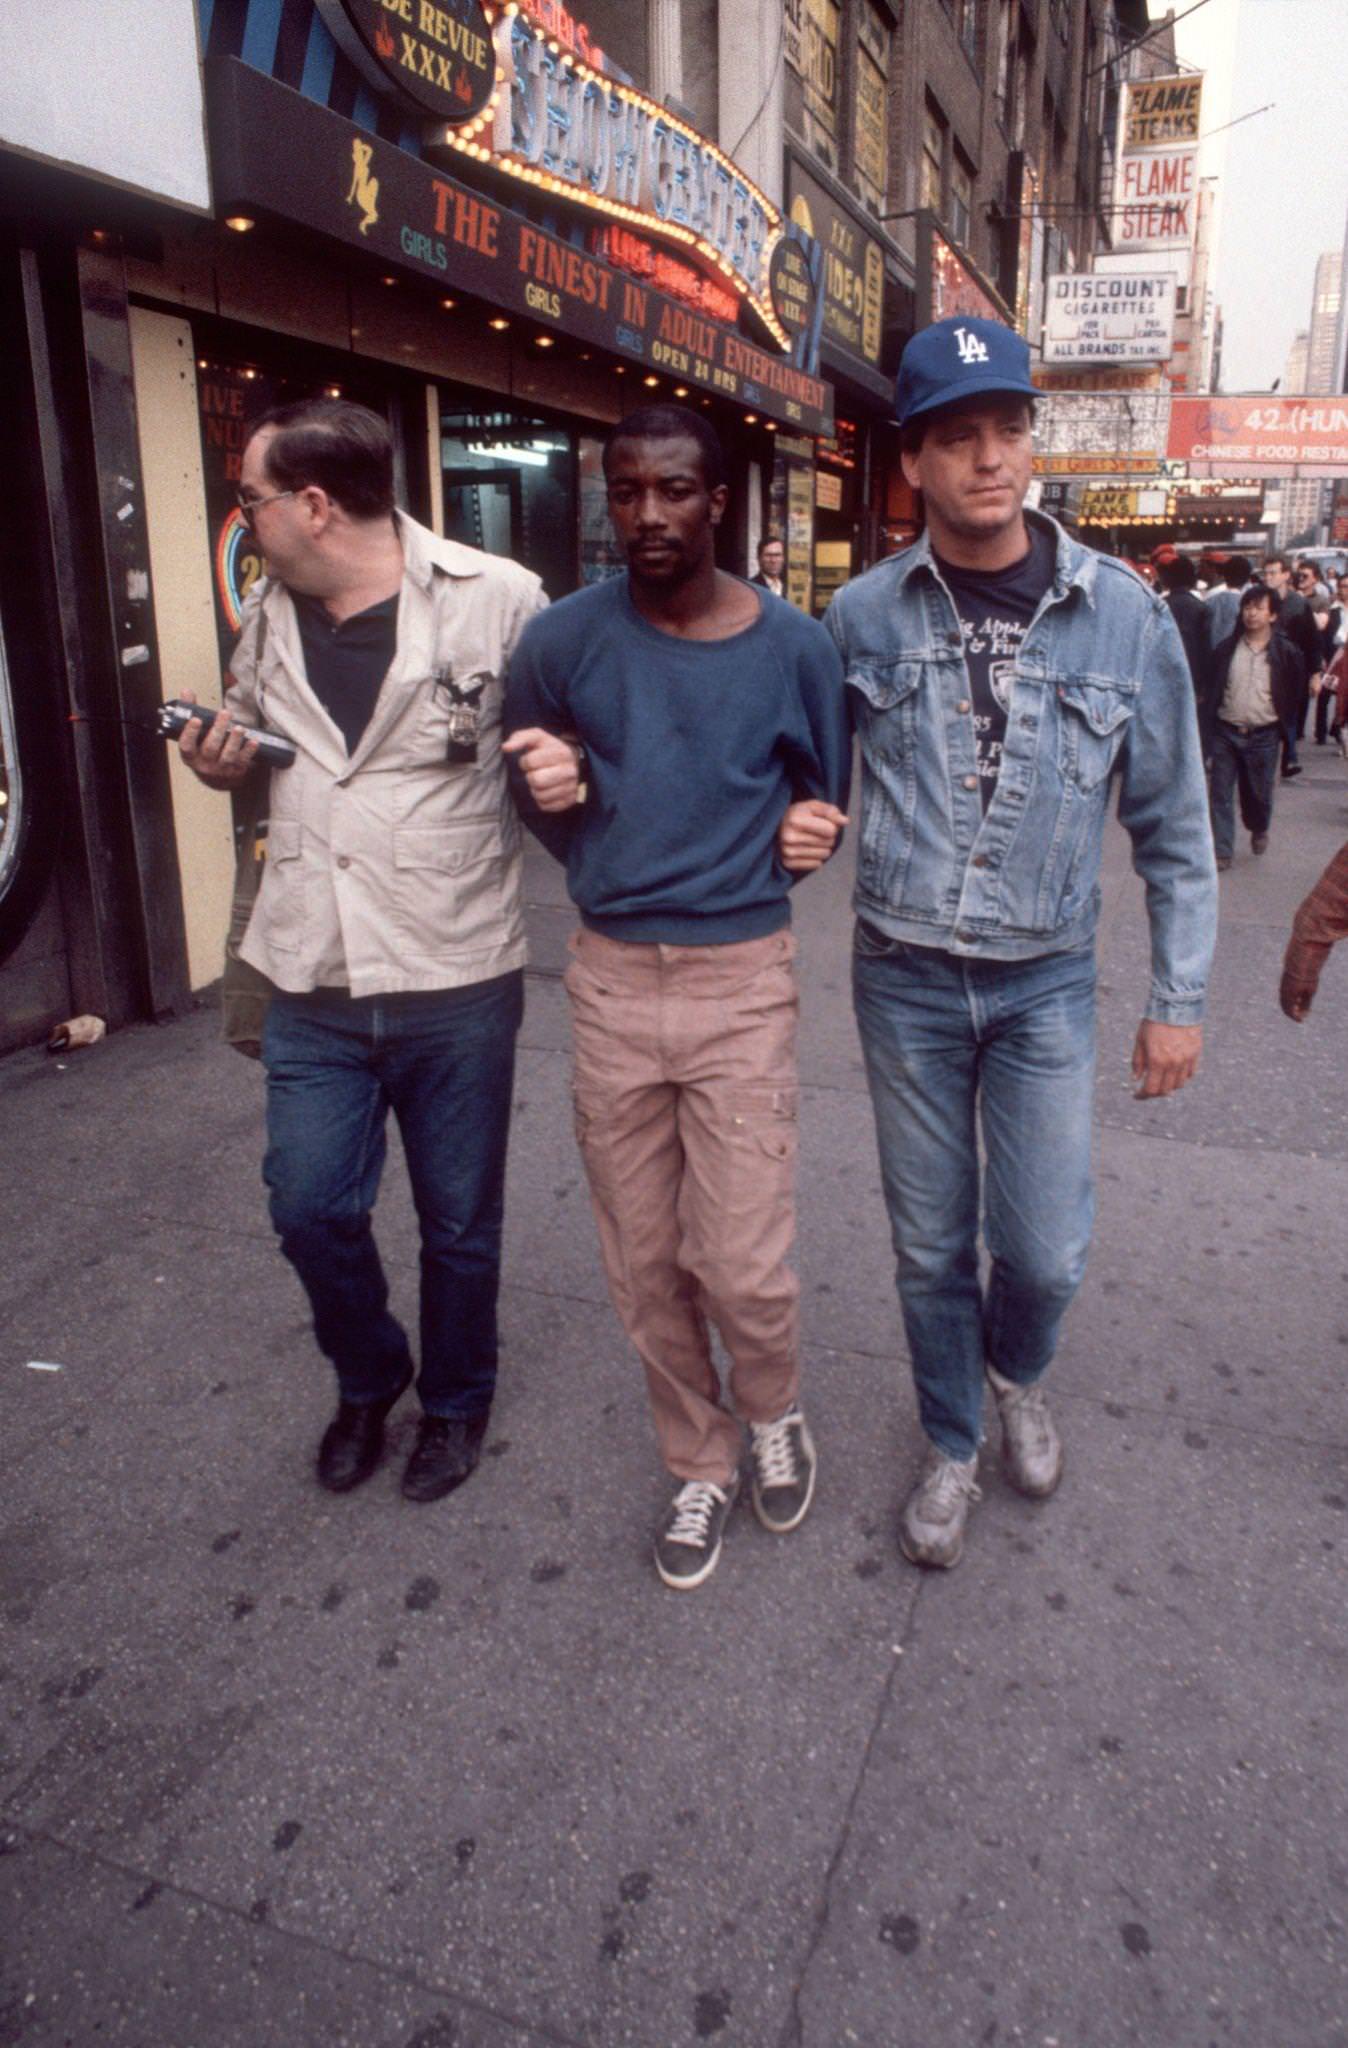 Man Arrested By Undercover Nypd For Selling Crack Cocaine In Times Square, Manhattan, 1986.